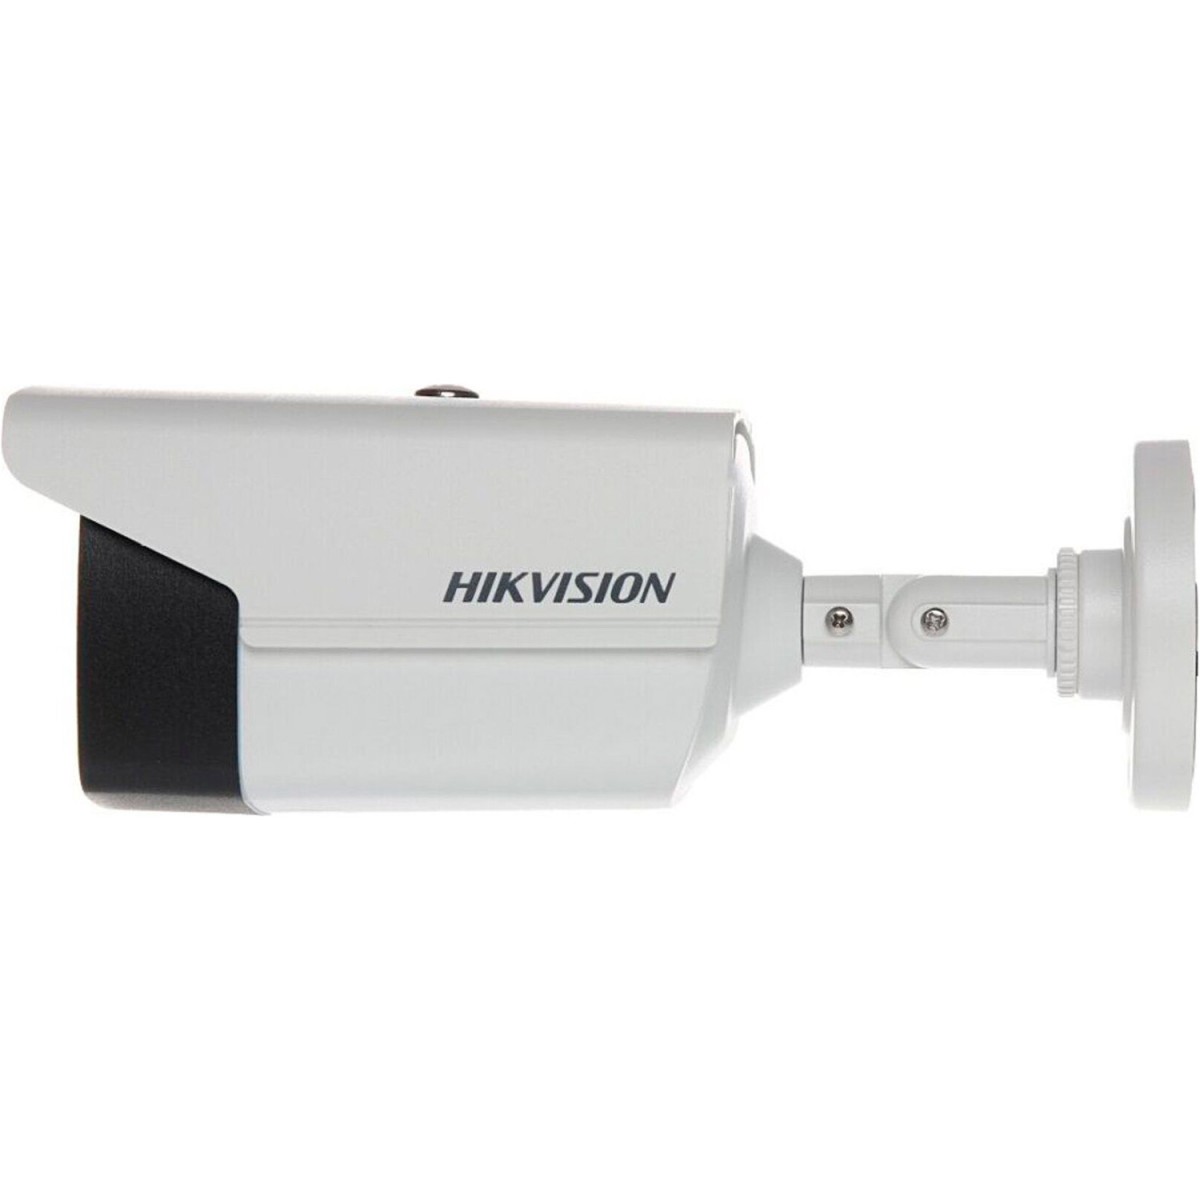 Камера Hikvision DS-2CE16H0T-IT5E (3.6) 98_98.jpg - фото 2